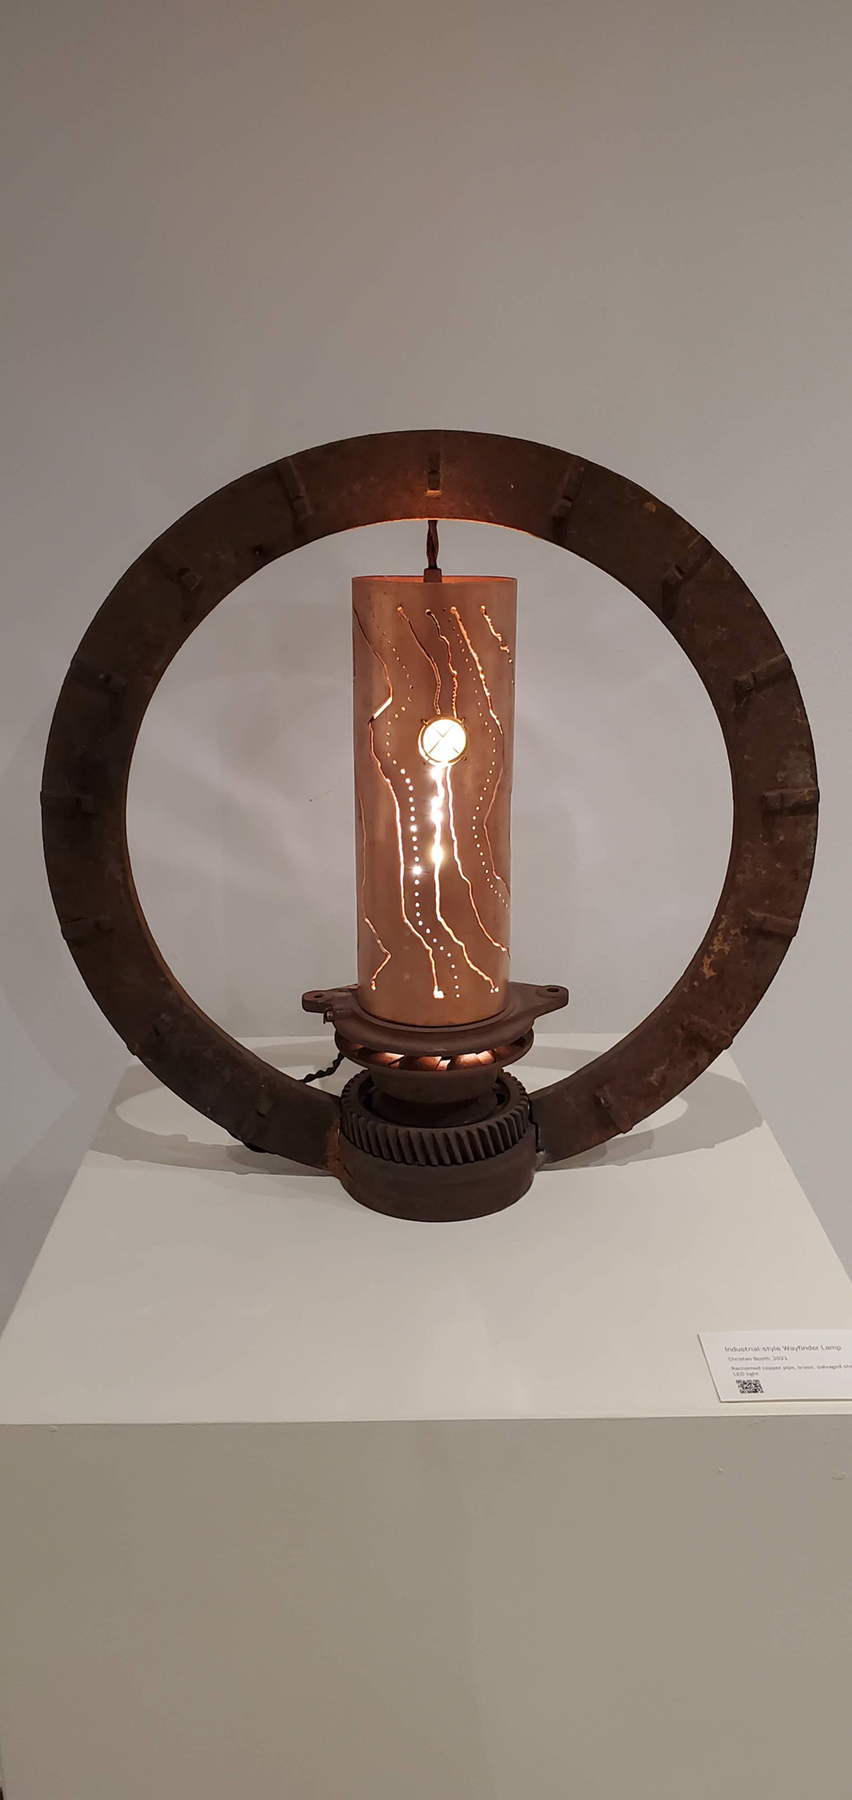 An industrial-style lamp with elements that suggest navigation., image courtesy of the artist